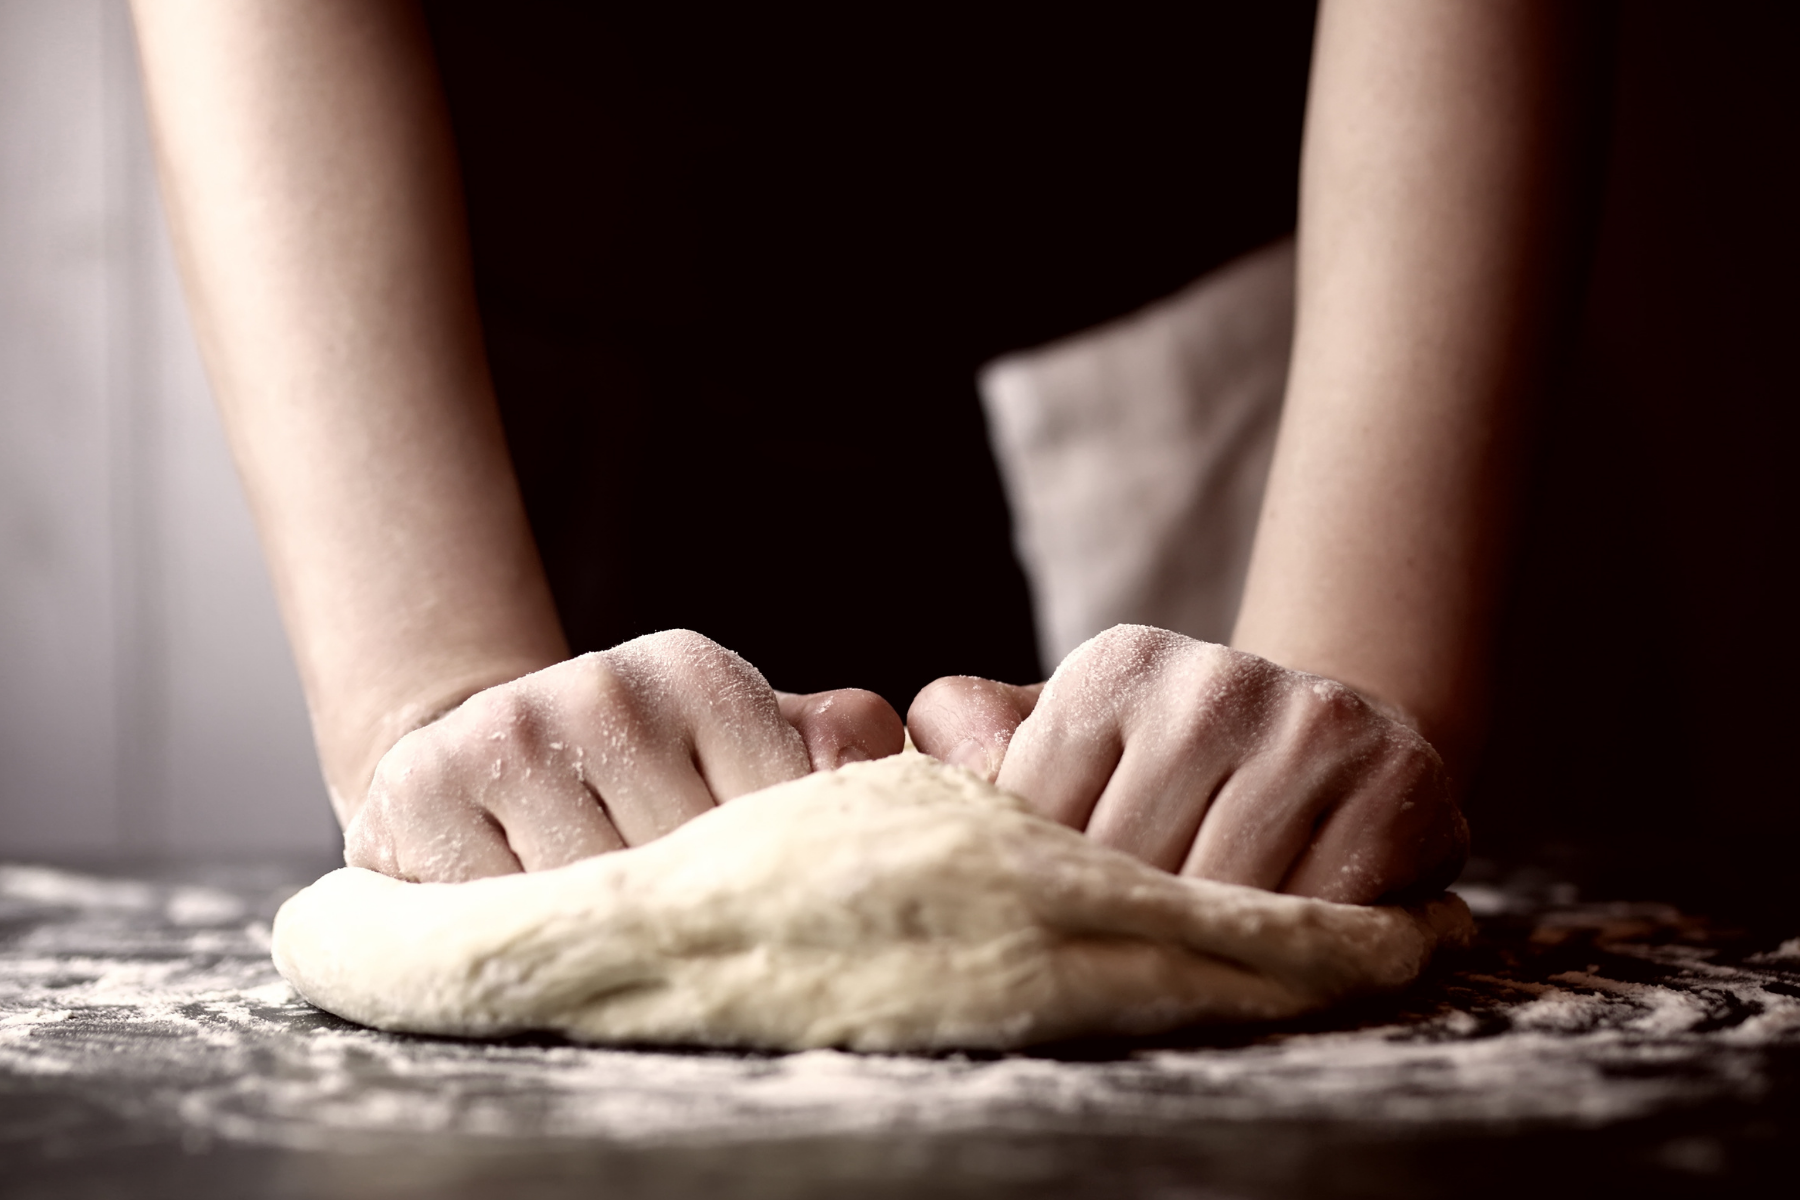 making your own pizza dough is so easy! two hands knead dough on a floured surface